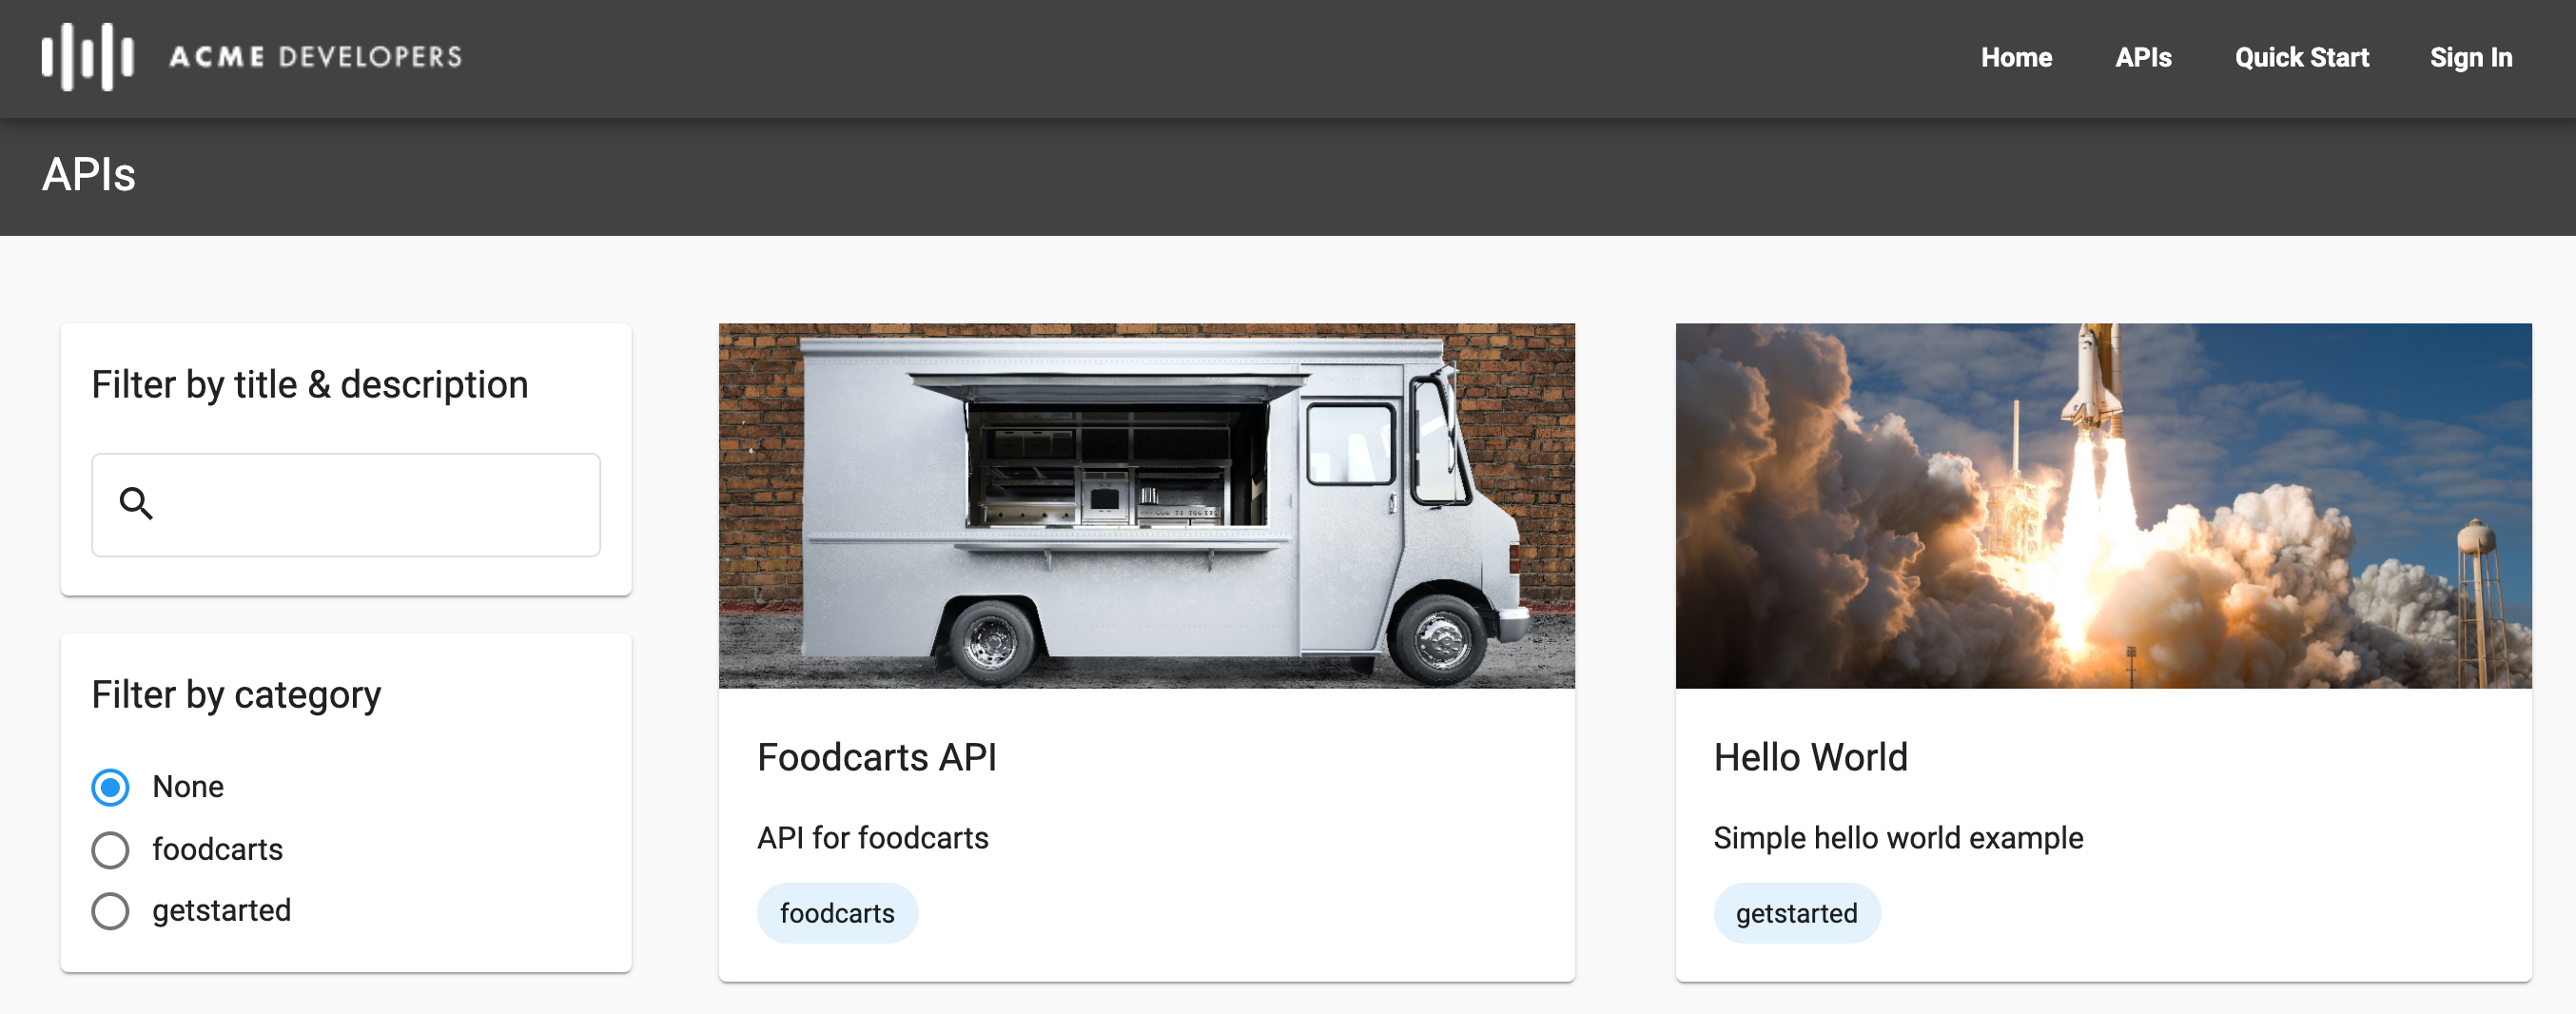 APIs page in live portal showing two categories and use of images